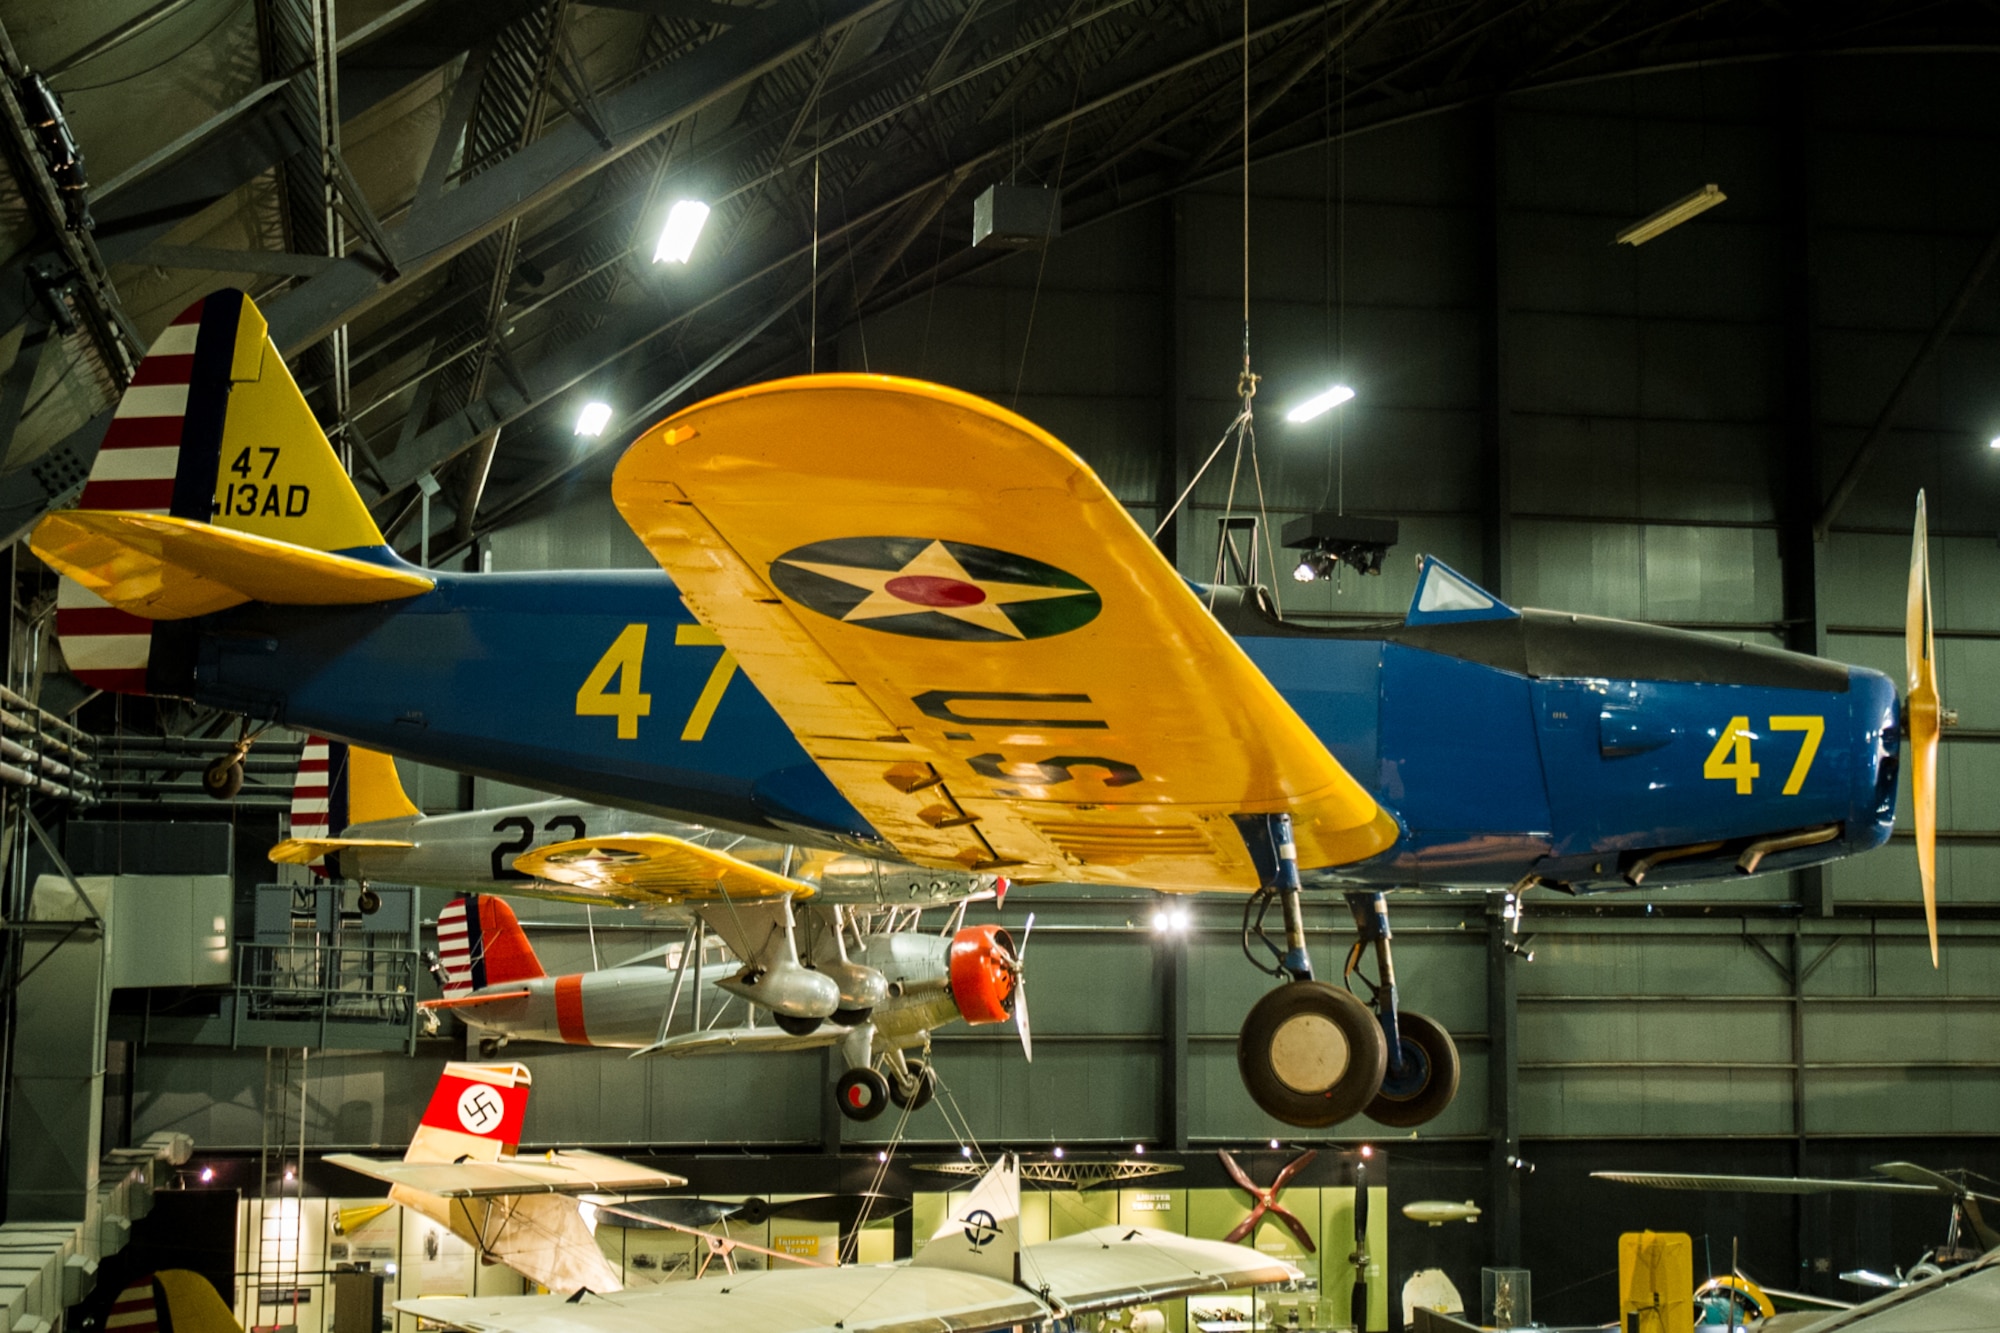 DAYTON, Ohio -- Fairchild PT-19A Cornell in the Early Years Gallery at the National Museum of the United States Air Force. (U.S. Air Force photo)